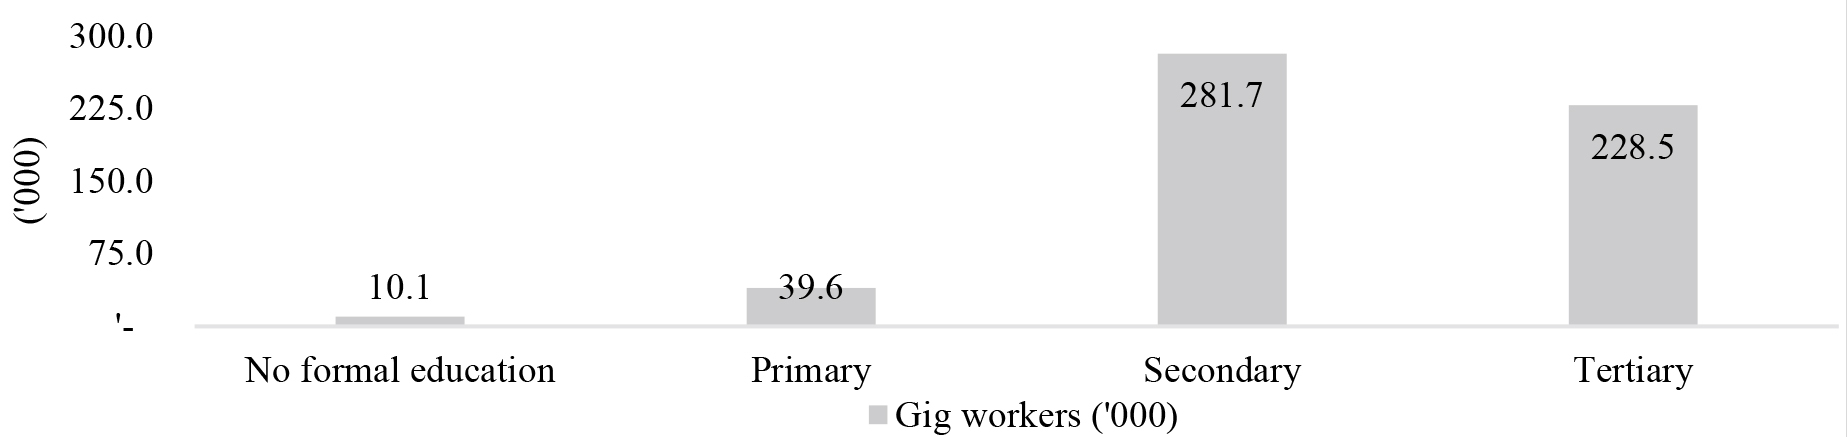 Number and share of gig workers (‘000) by education attainment, Malaysia, 2018. Source: Authors’ estimates based on 2018 Labour Force Survey data, (DOSM).